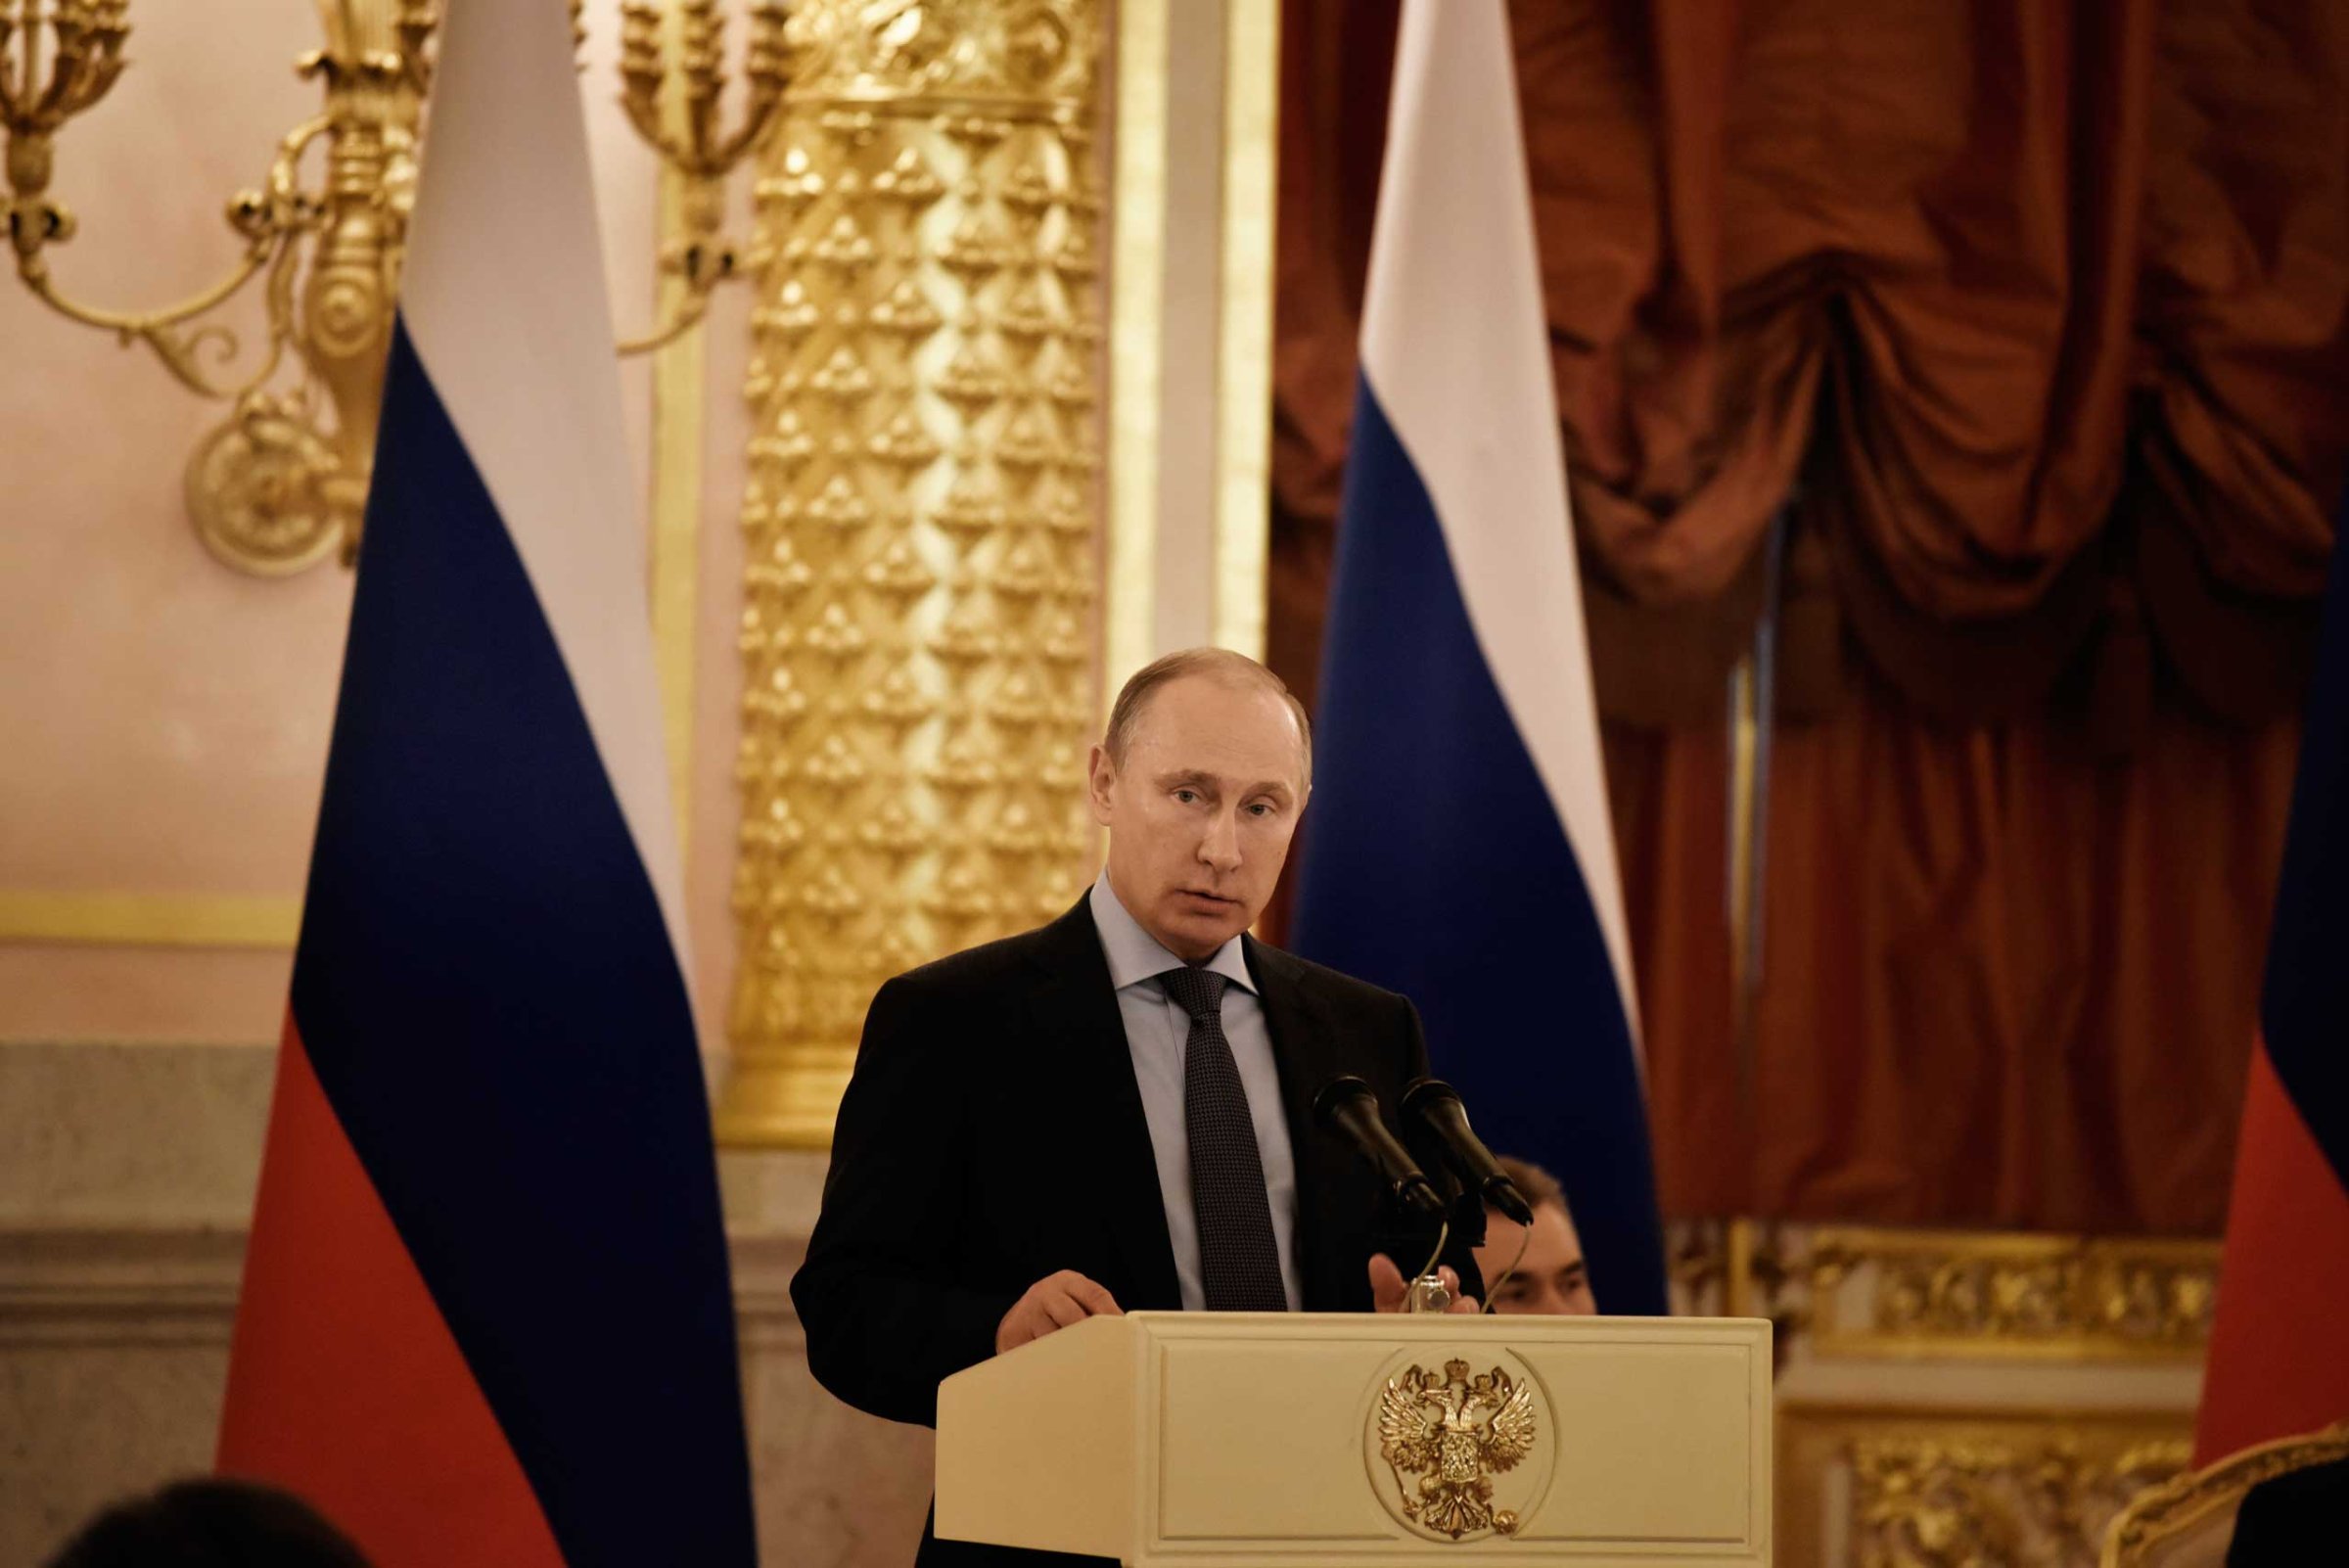 President Vladimir Putin speaks during his meeting with Human Rights activists in the Grand Kremlin Palace, Moscow, Dec. 5, 2014.